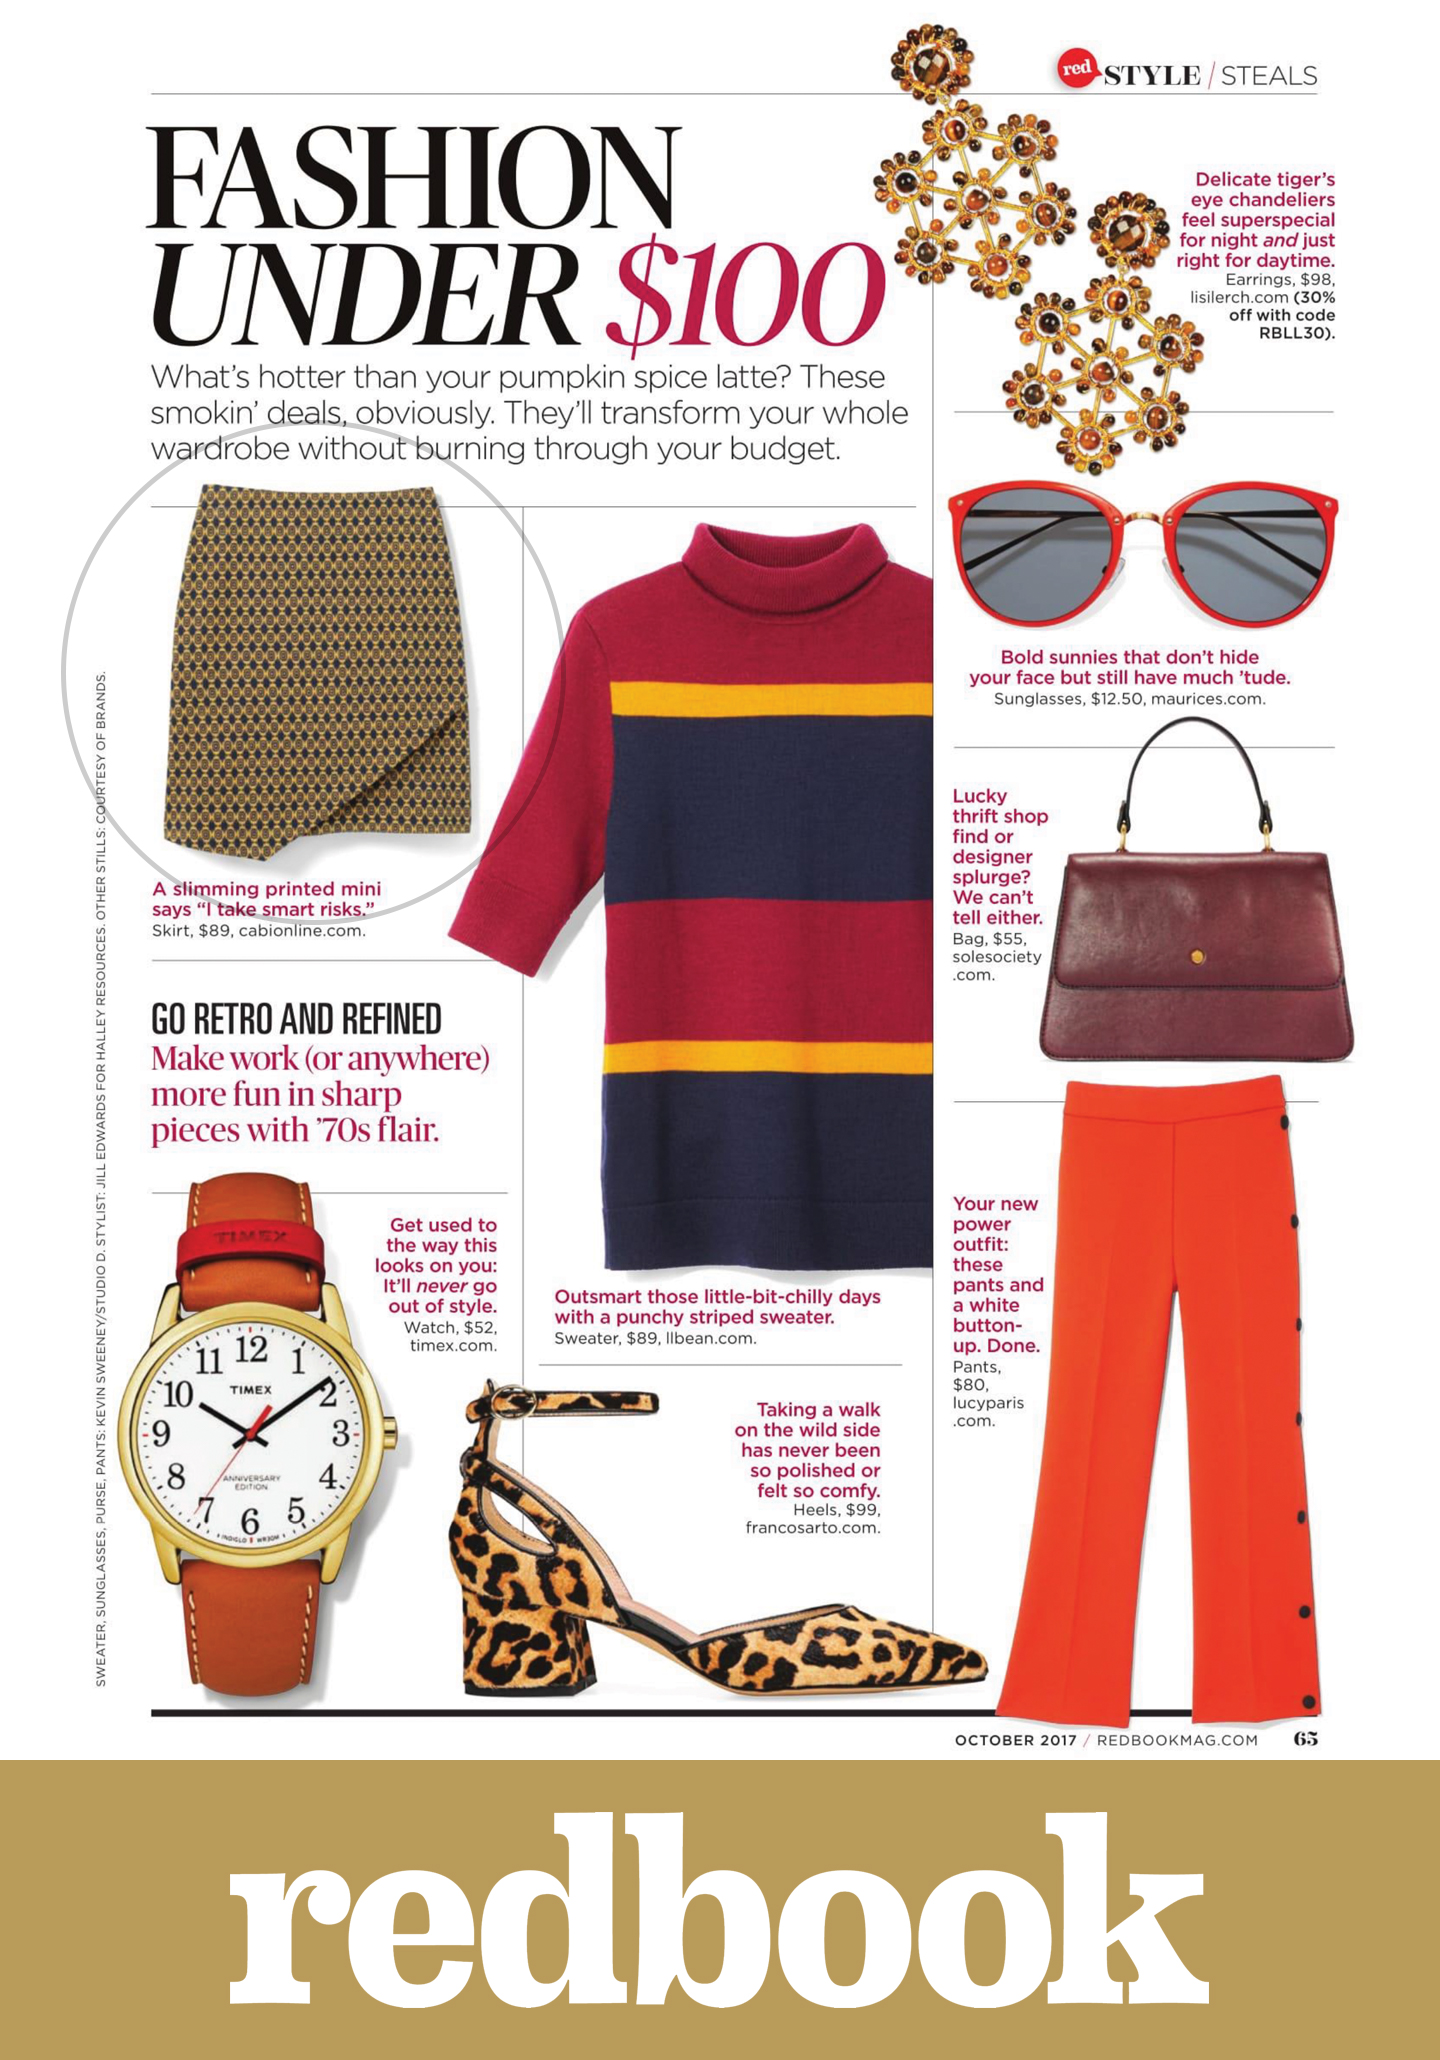 Spotted in Redbook: cabi's Fall 2017 Standout Skirt